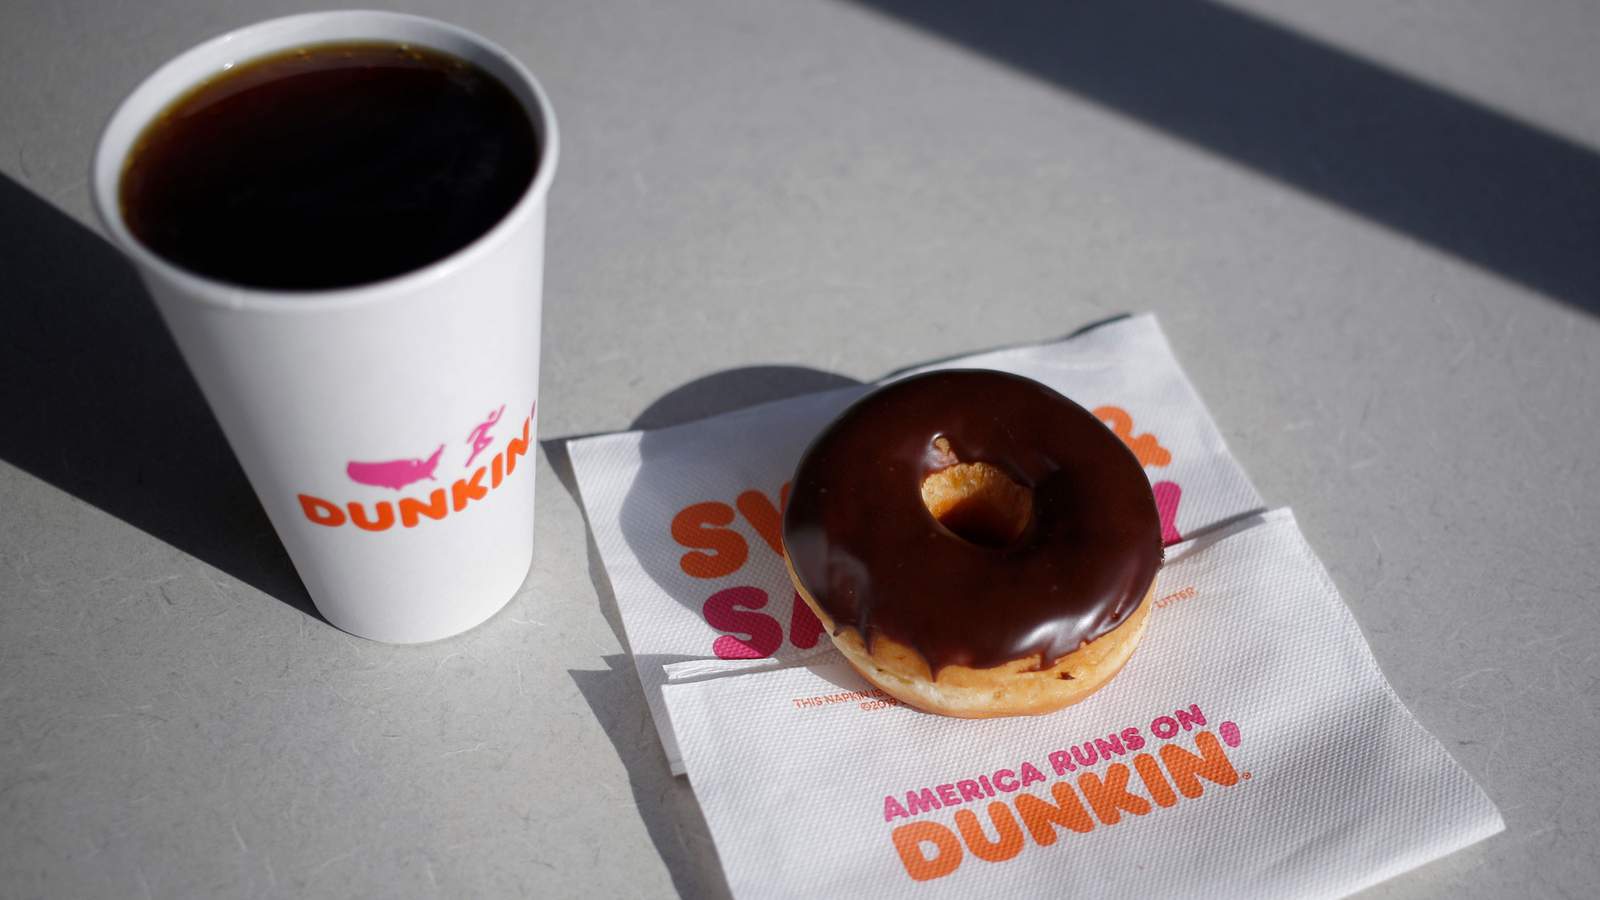 Dunkin’ comes to Missouri City after two years since its closure, report says